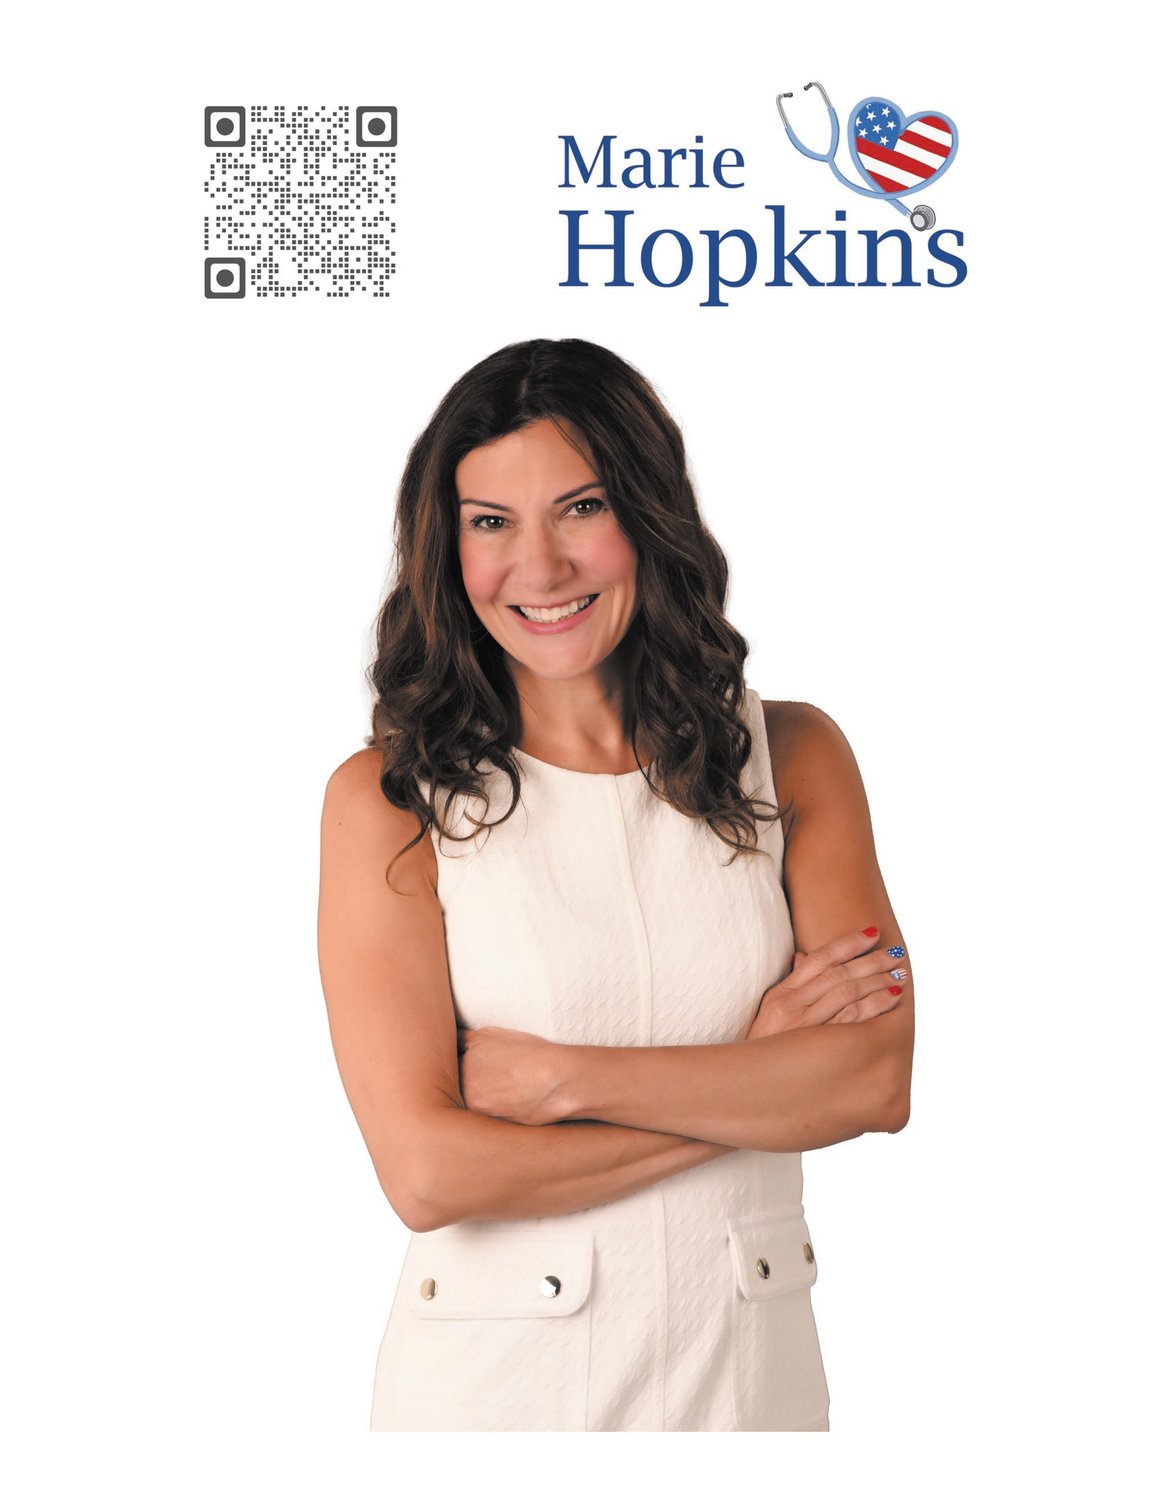 Meet Marie Hopkins, running for State Representative from District 21.  She wants to know what is on your mind!  If you haven’t met her in her door-to-door visits, contact her via email at contact@marie4ri or visit her website at www.marie4ri.com.  